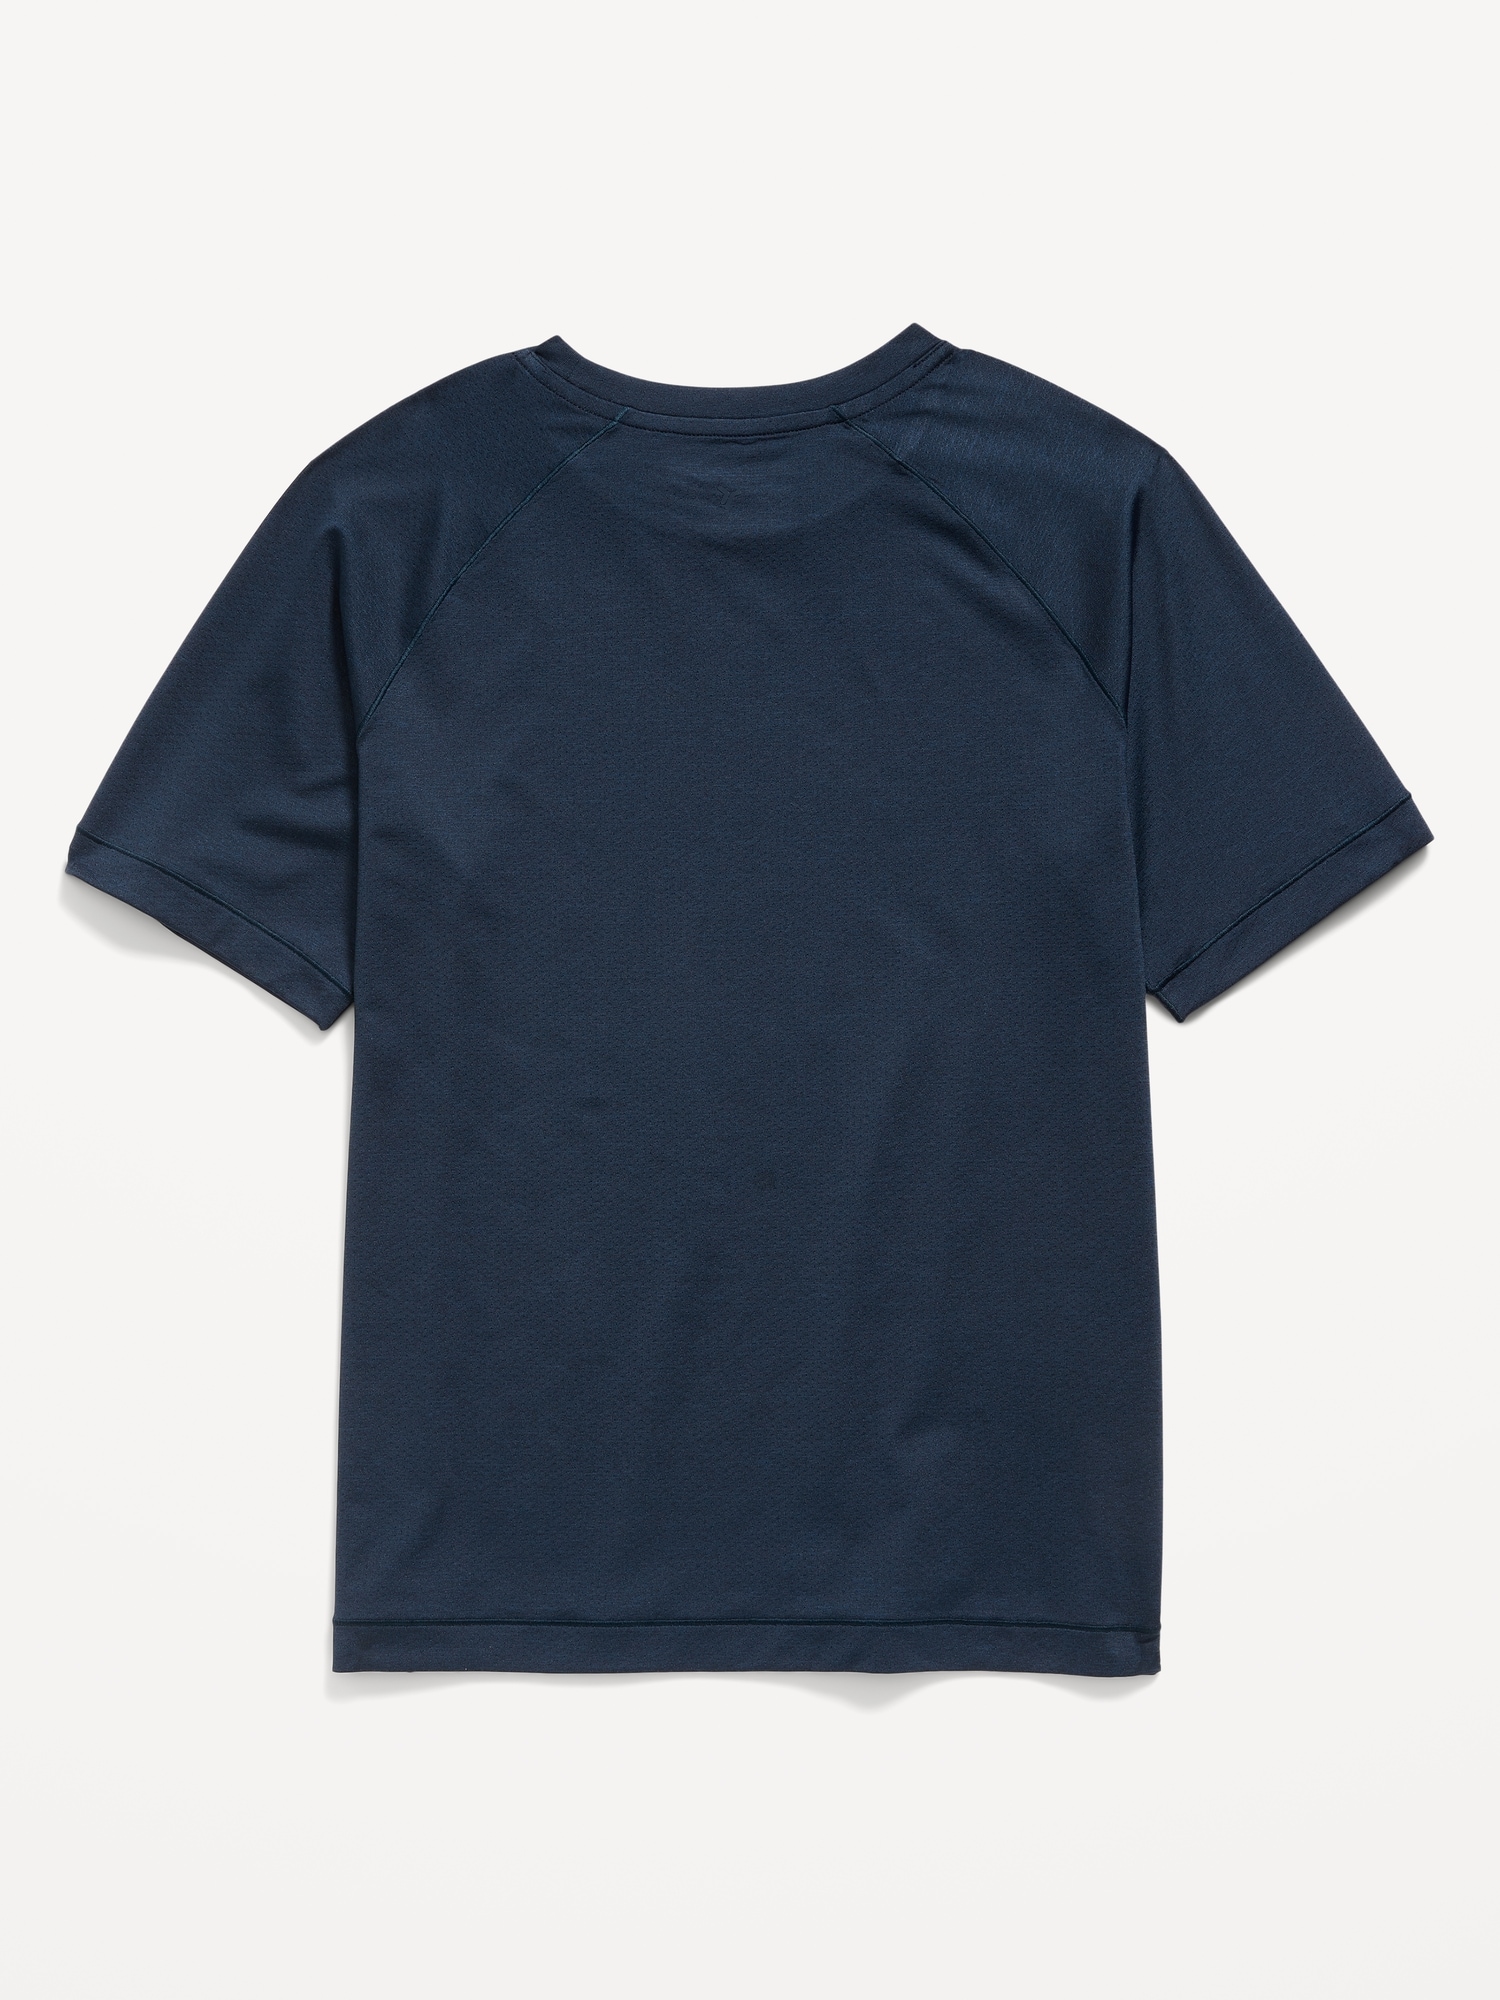 Go-Dry Cool Performance T-Shirt for Boys | Old Navy